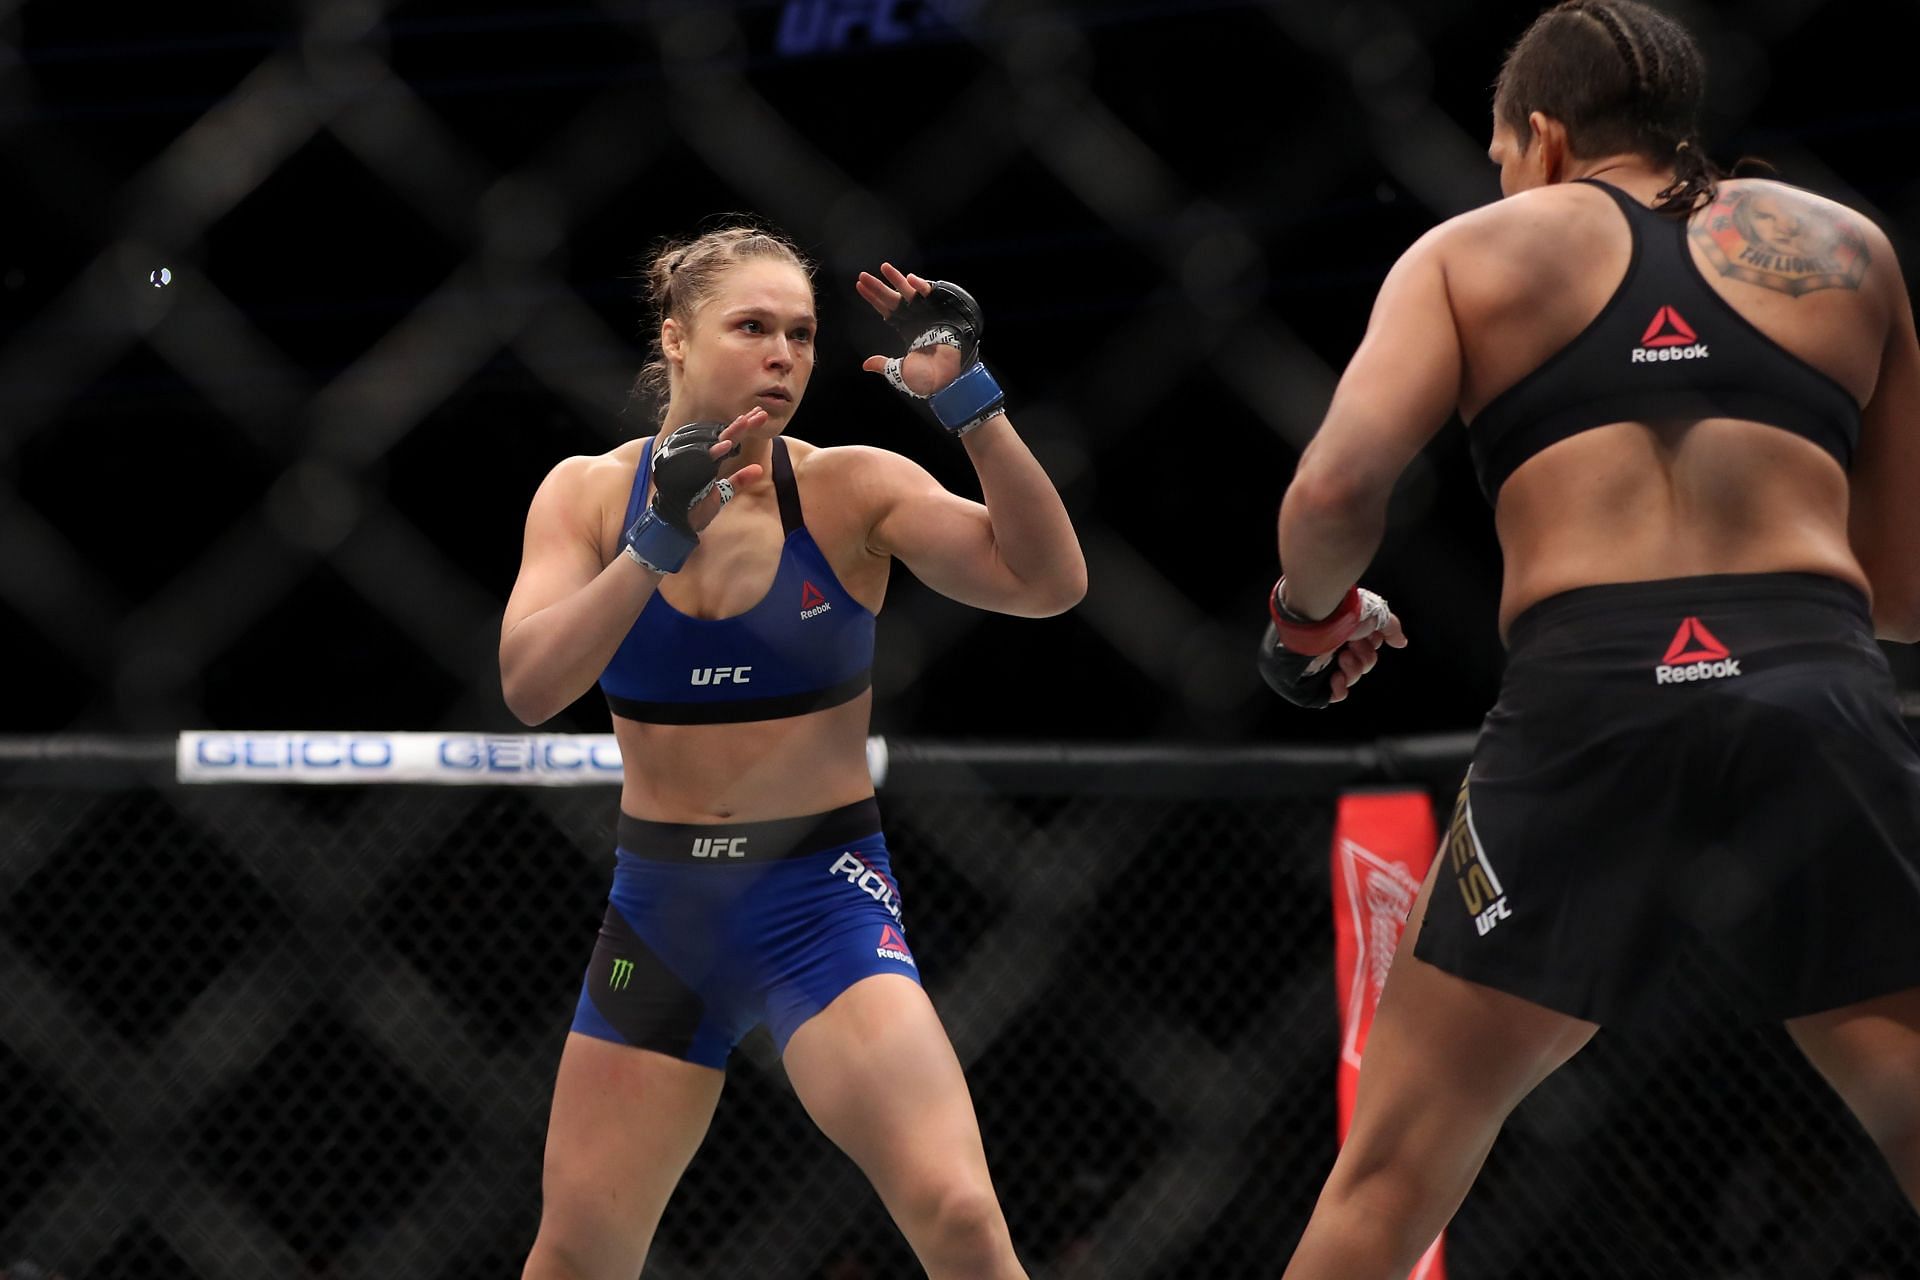 Ronda Rousey has a record of 12-2